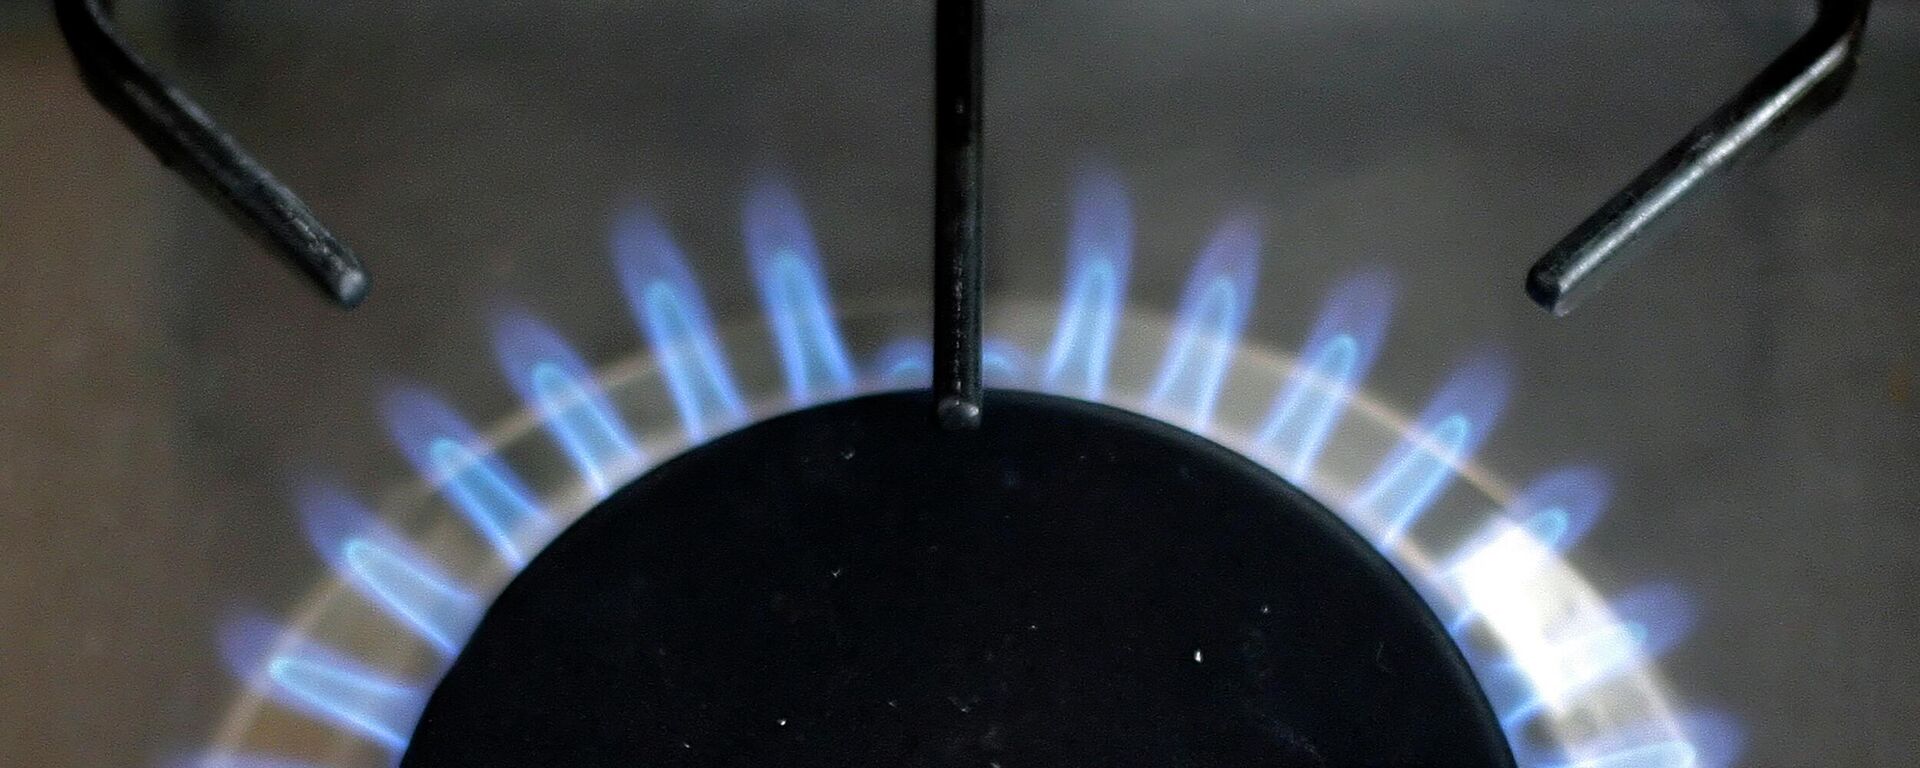 A gas burner of a stove is pictured in London, on July 31, 2008.  British energy firm Centrica said Thursday that net profit surged 79 percent to 1.802 billion pounds (2.286 billion euros, 3.569 billion dollars) in the first half as it charged more for its gas and electricity to fight soaring wholesale costs. - Sputnik International, 1920, 01.08.2022